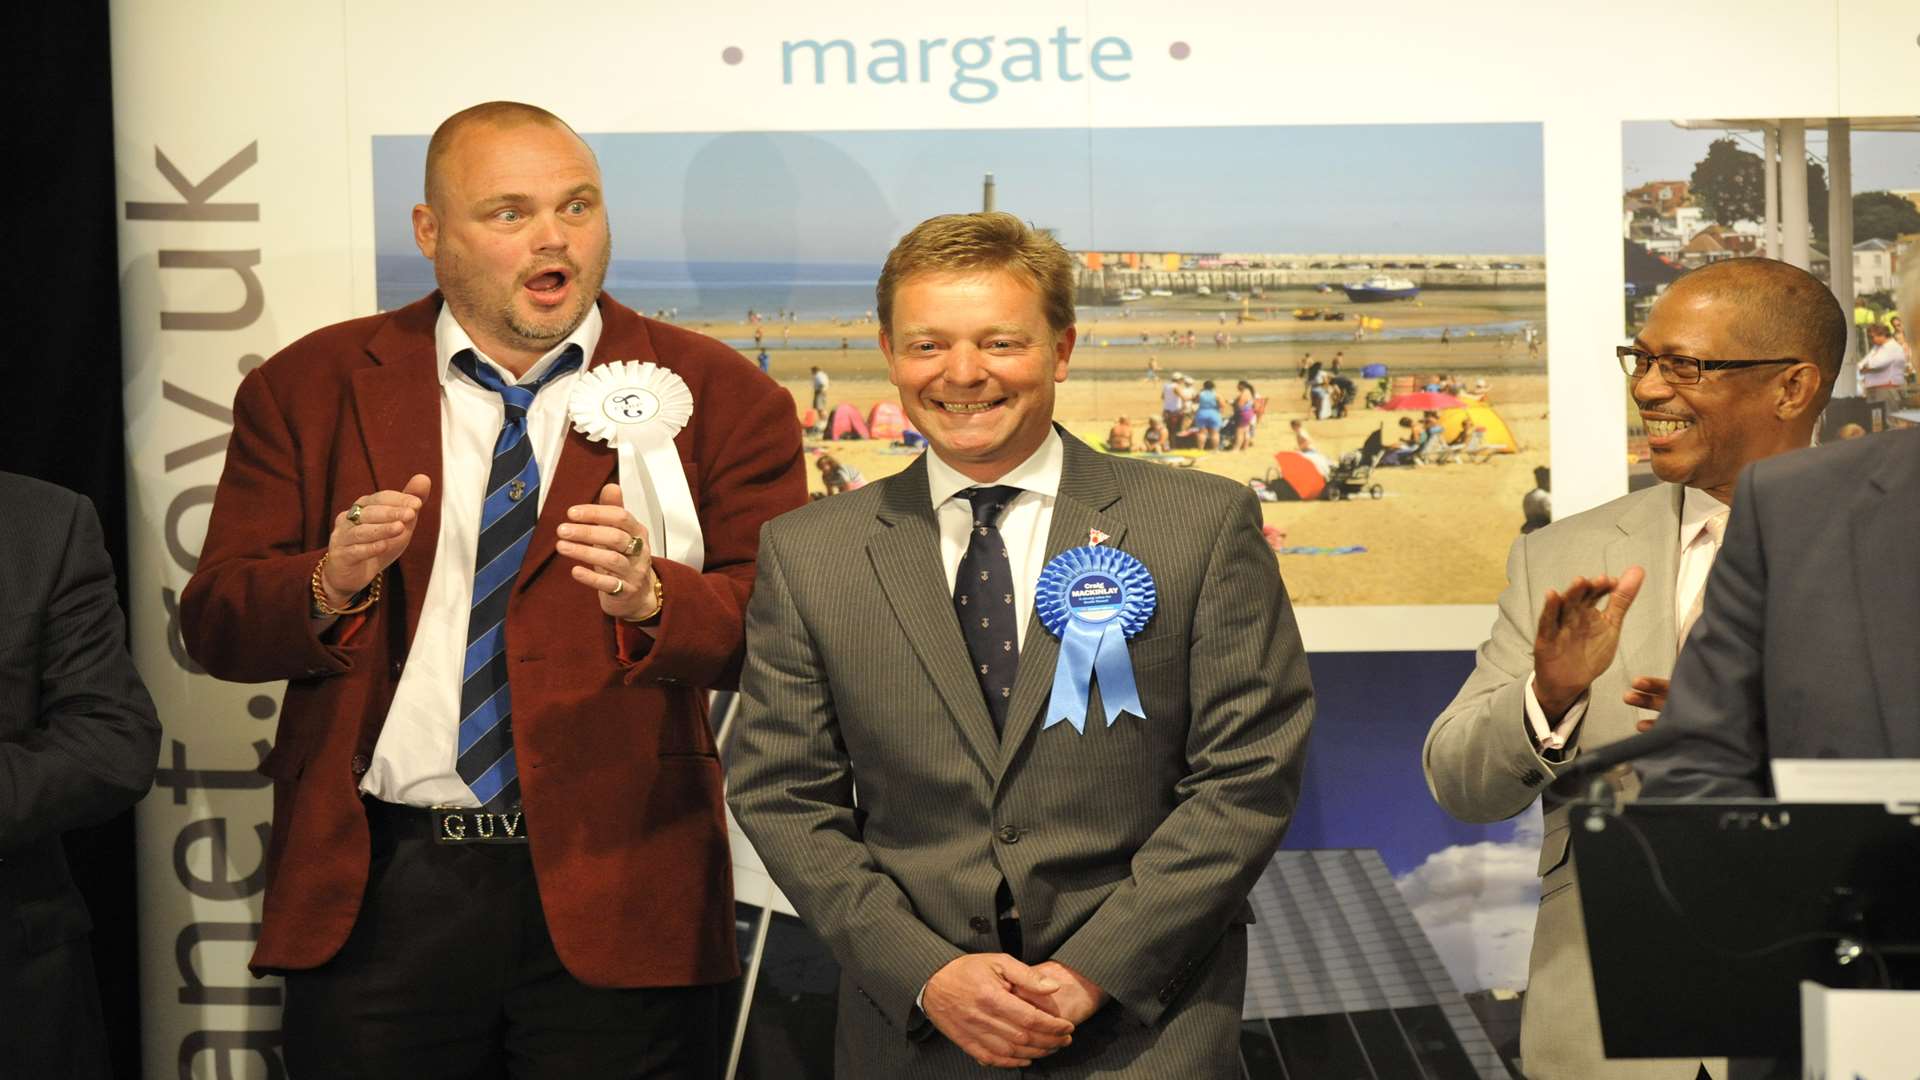 Craig Mackinlay wins South Thanet at the general election watched by pub landlord Al Murray